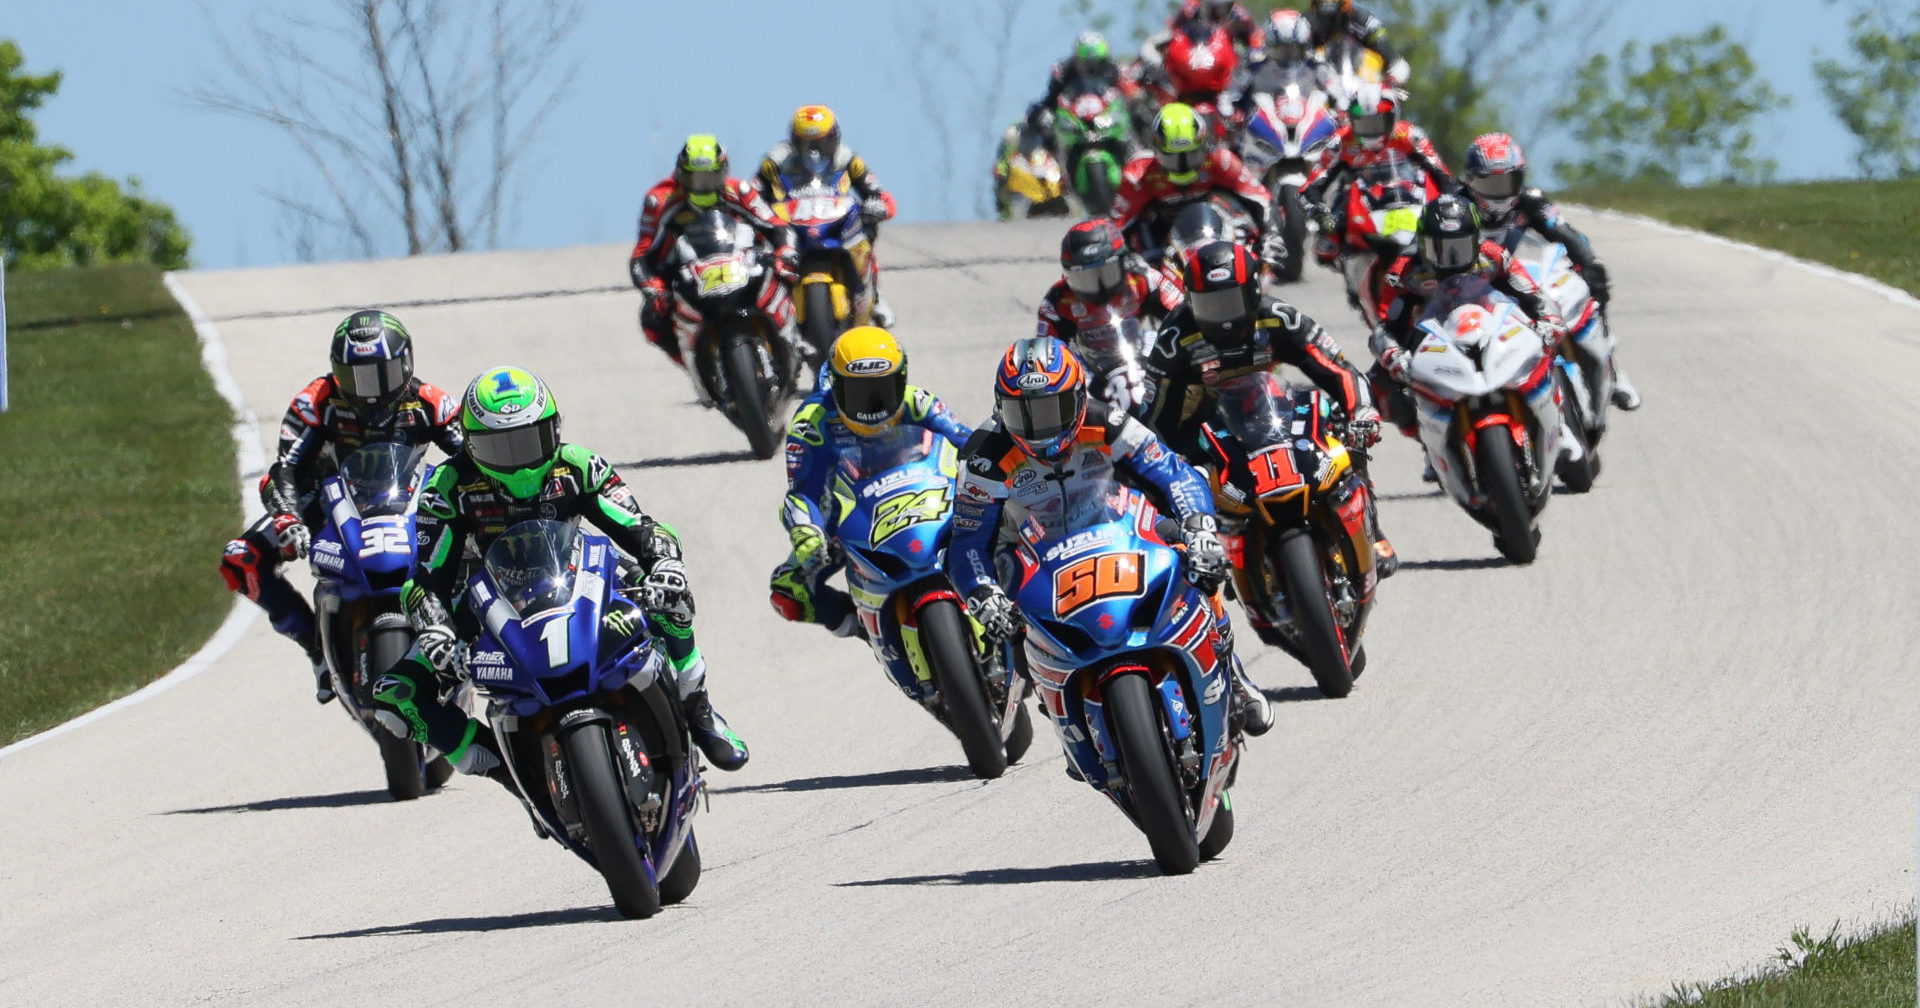 Cameron Beaubier (1) passes Bobby Fong (50) for the lead early in MotoAmerica HONOS Superbike Race Two at Road America. Photo by Brian J. Nelson, courtesy MotoAmerica.